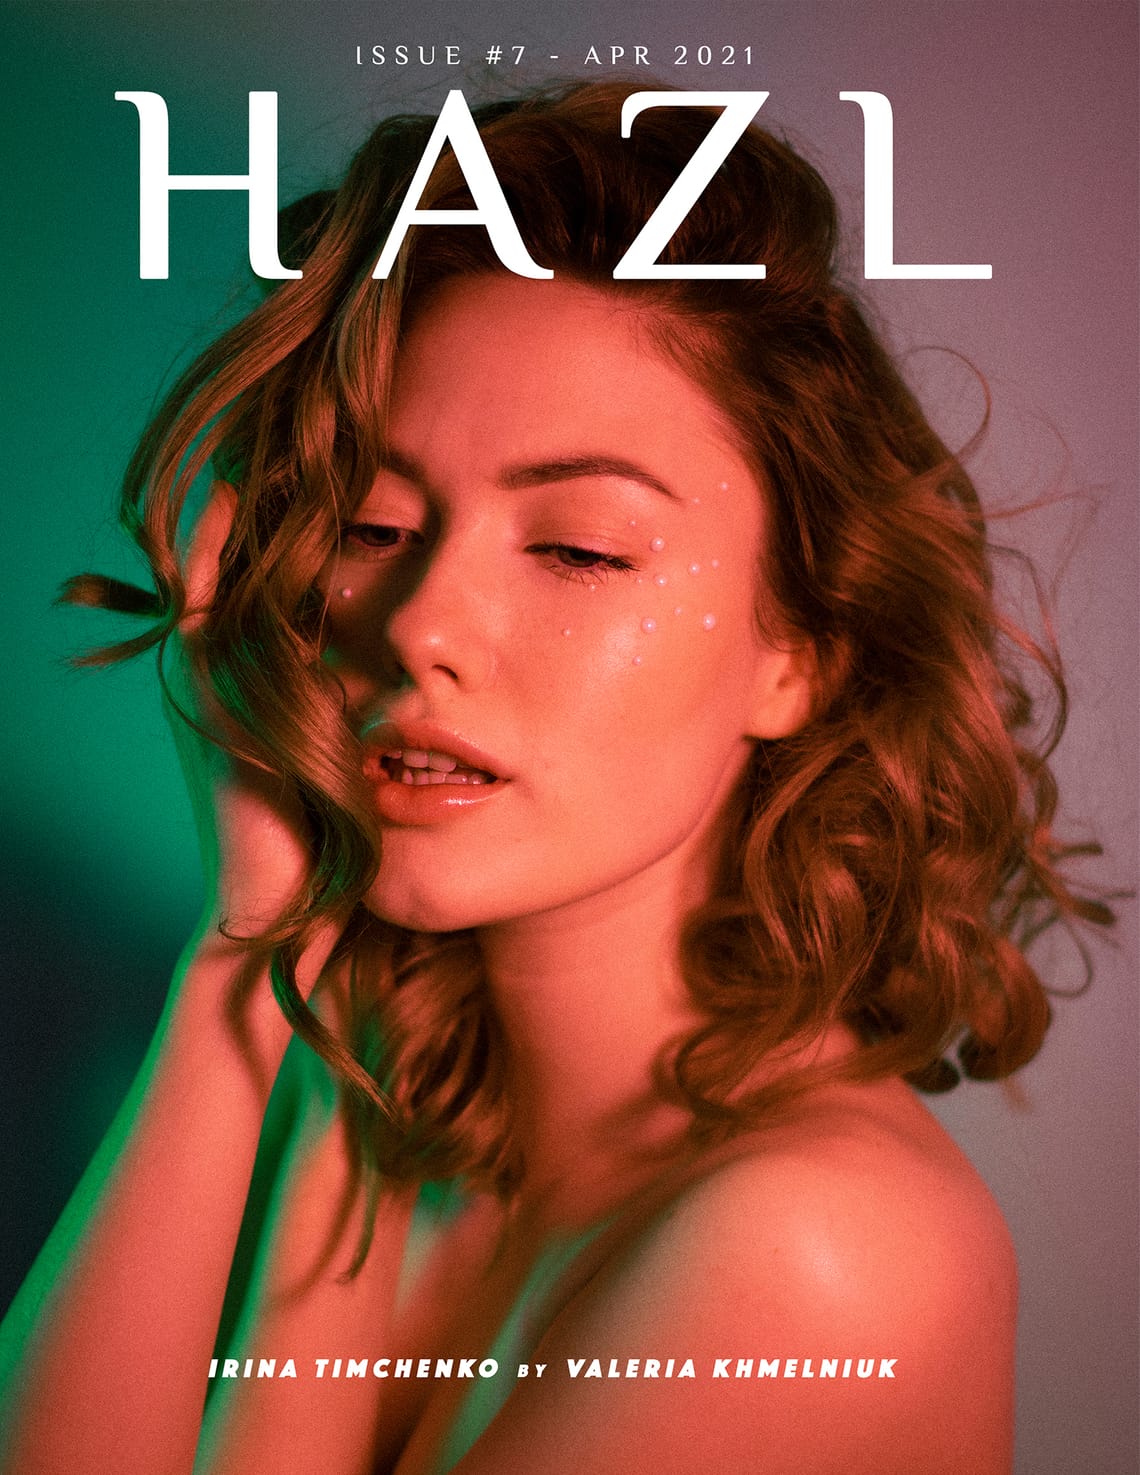 HAZL Magazine Issue #7 -  April 2021 Launched Worldwide